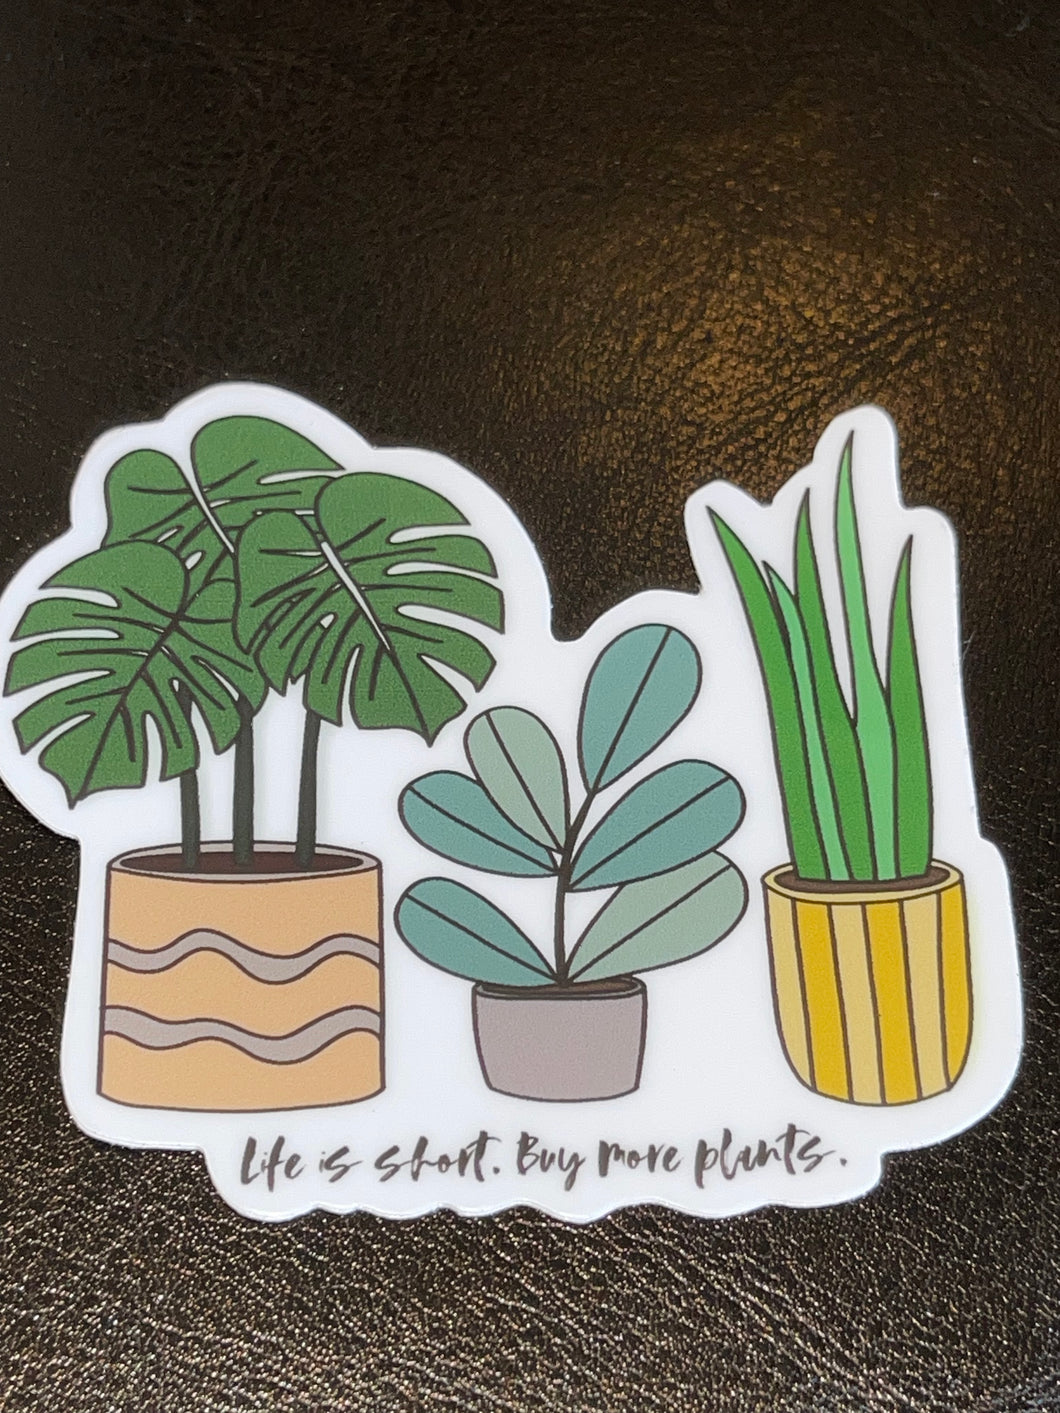 Life is short. Buy more plants Sticker